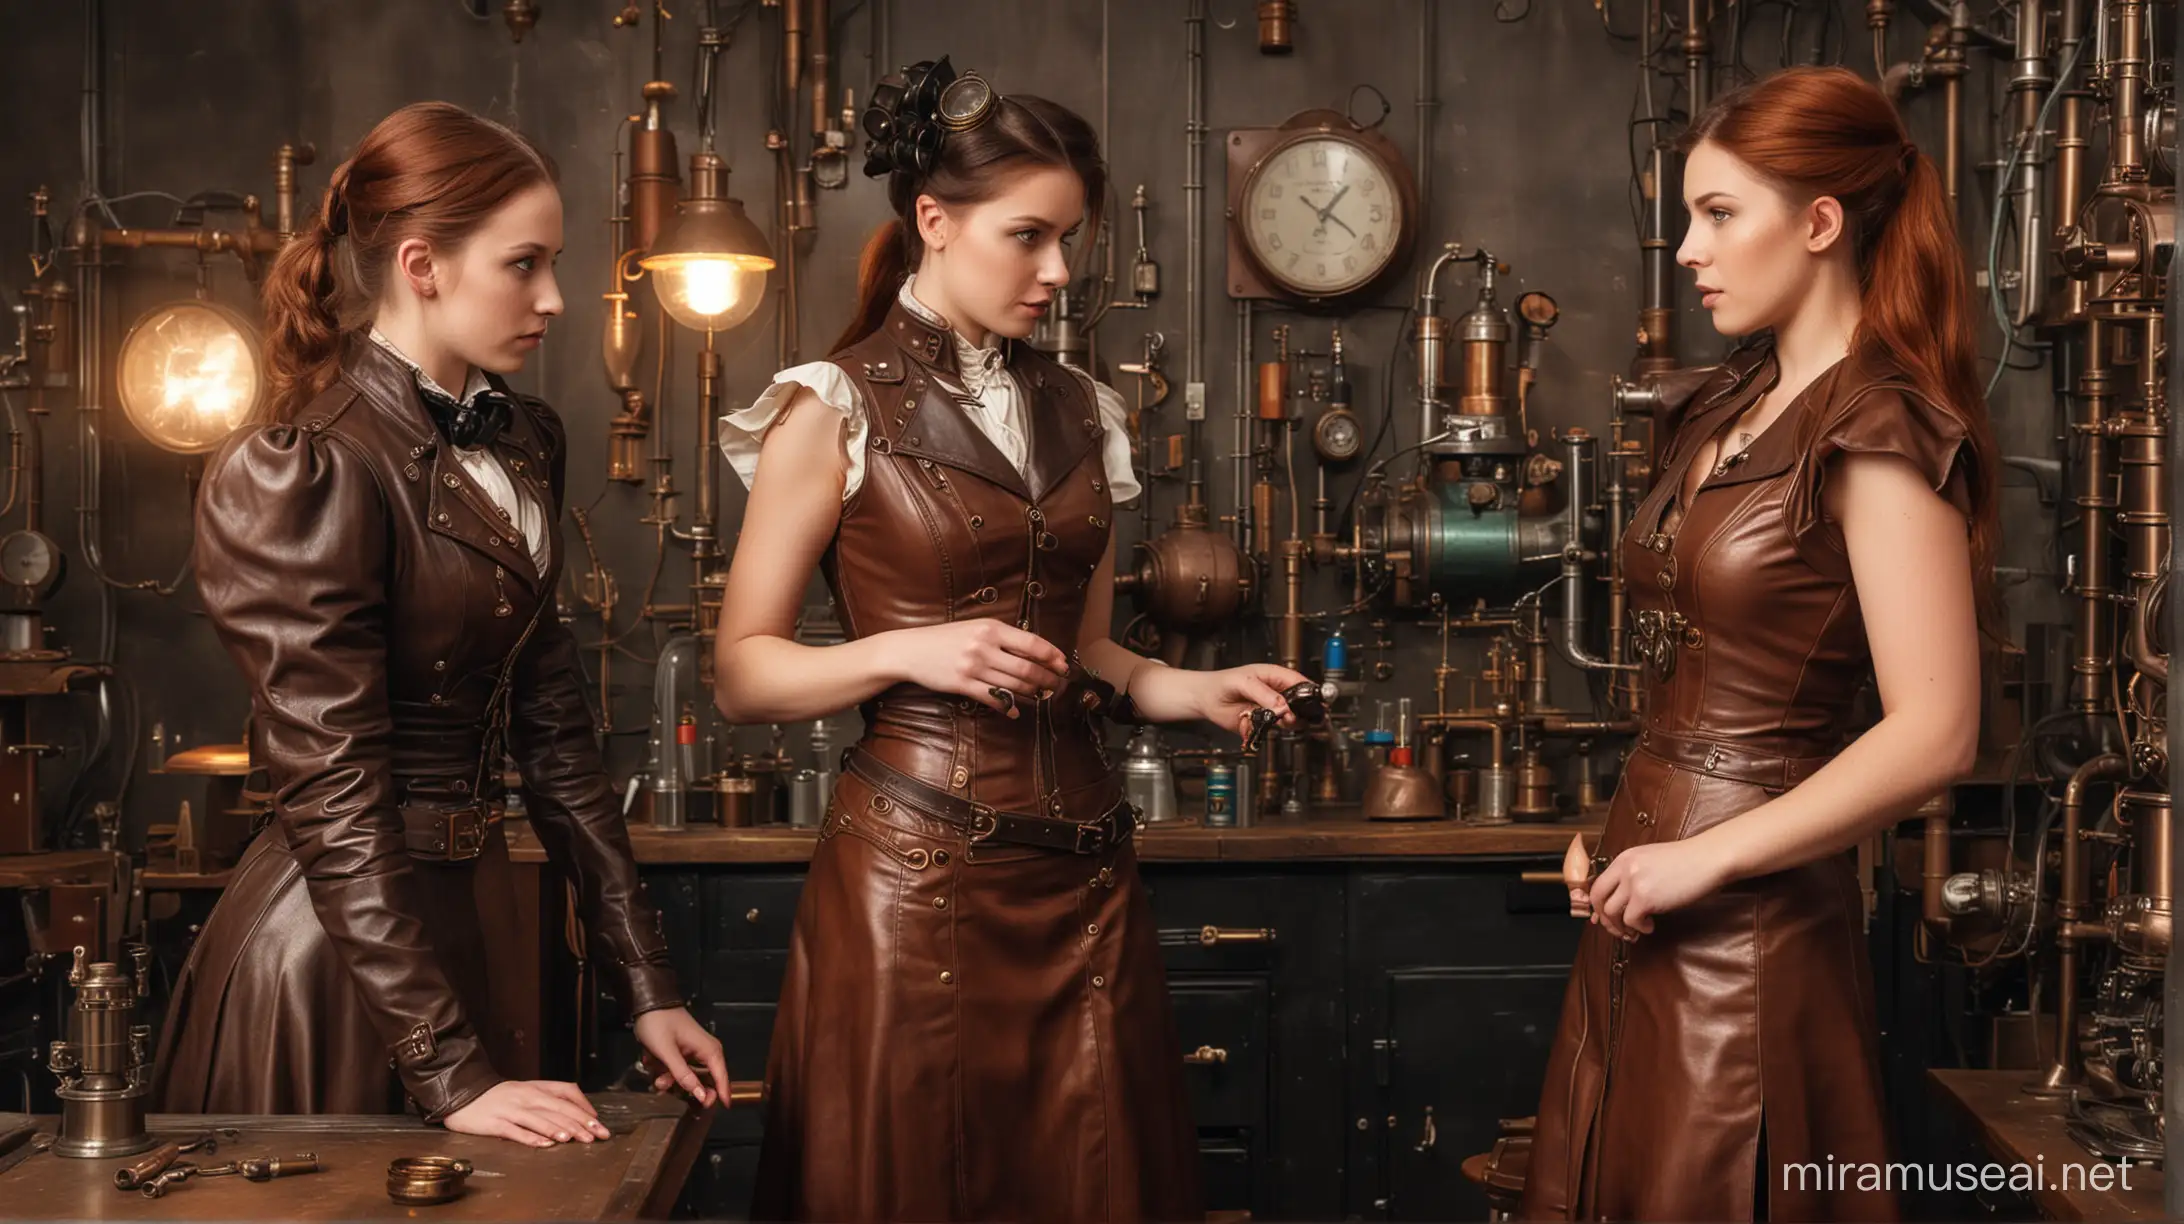 Young Scientist Demonstrates Steampunk Time Machine to Elegant Ladies in Leather Dresses